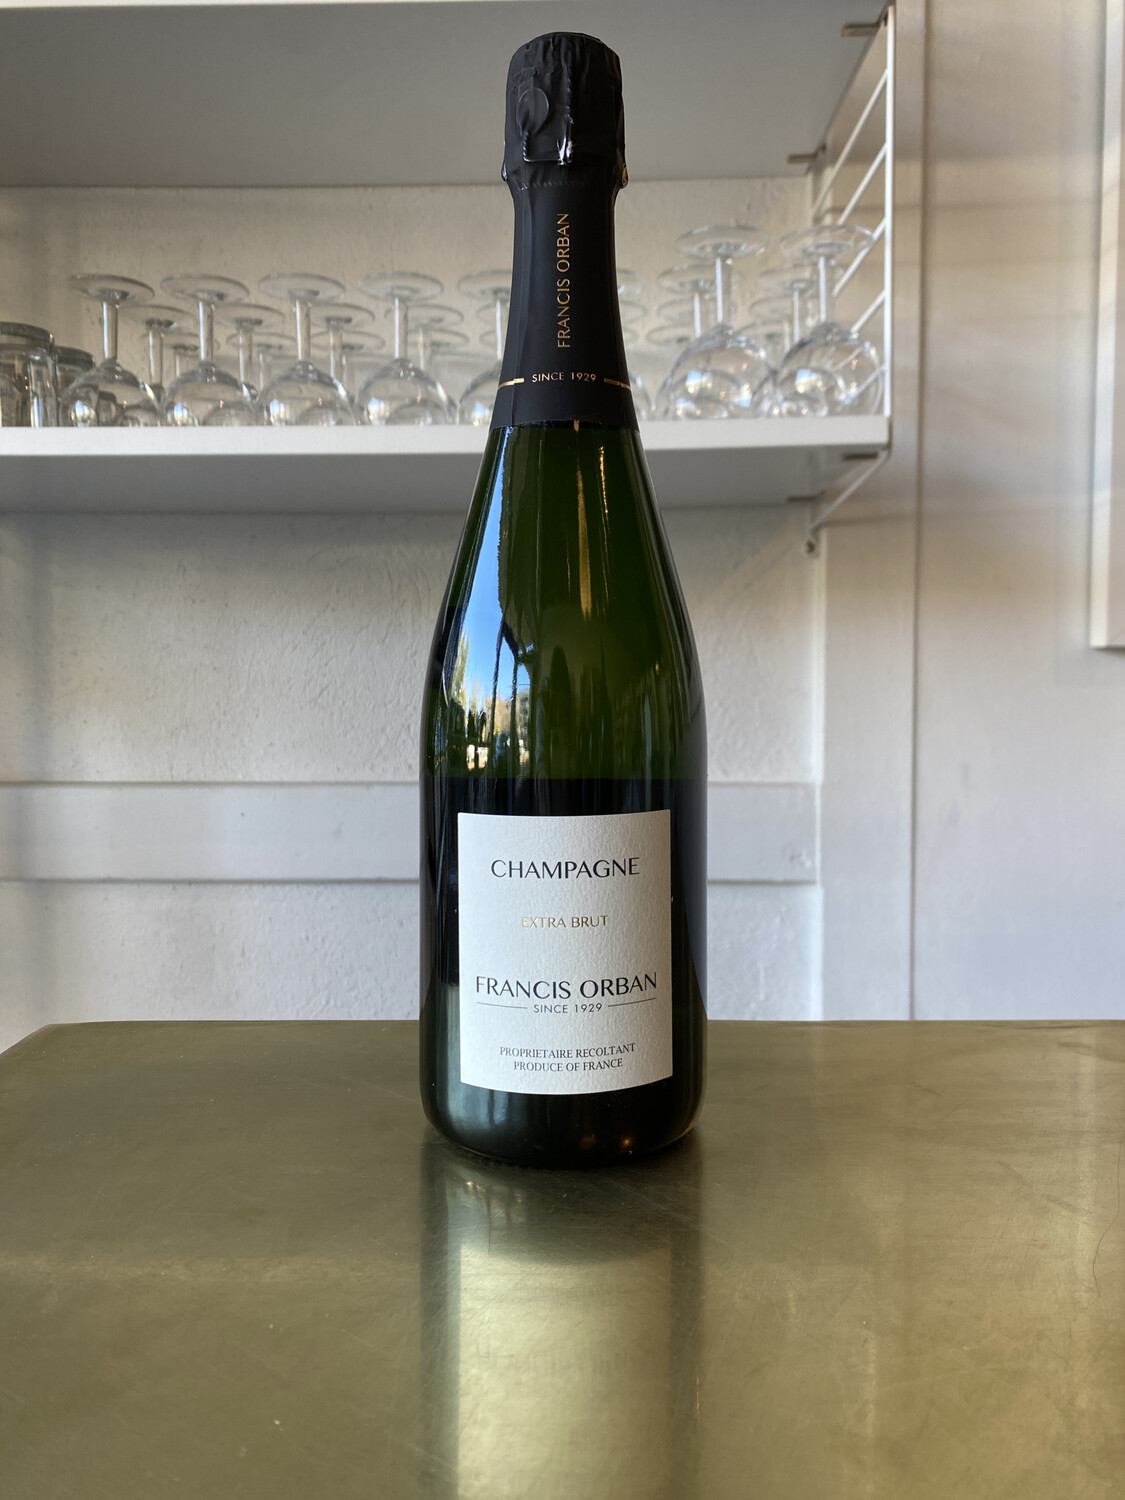 Champagne Francis Orban, Champagne Extra Brut Cuvee